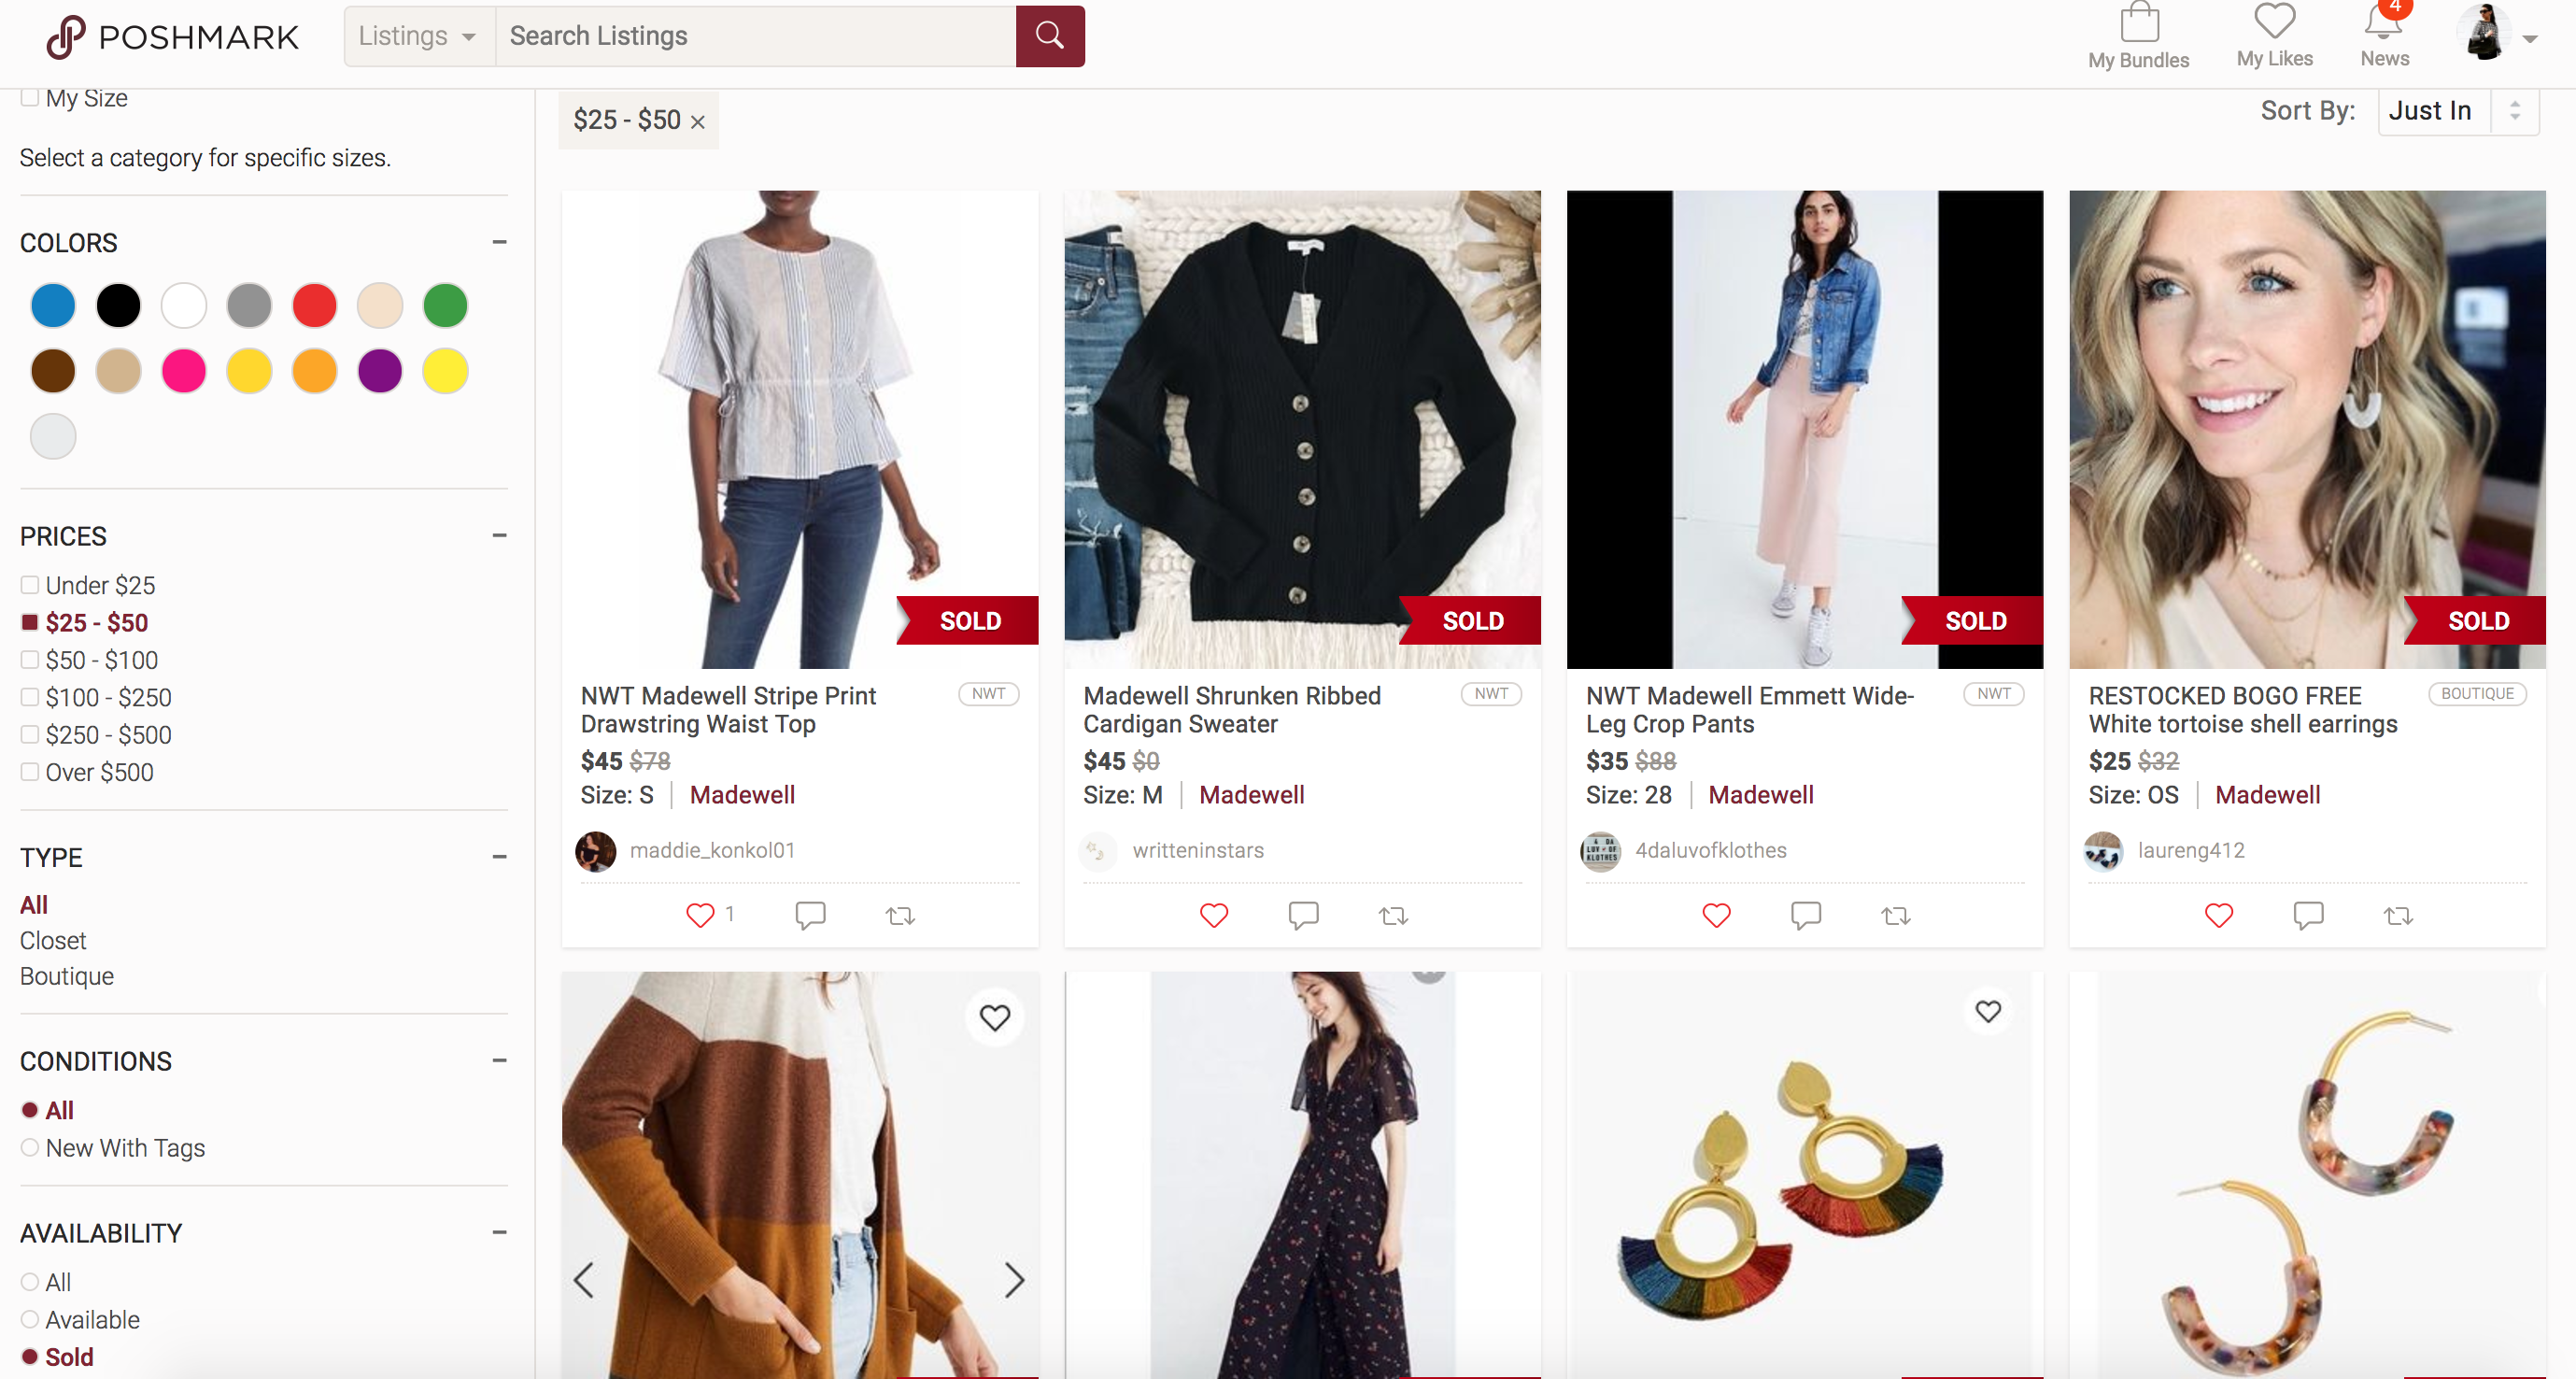 How to Create a Mini Reseller Trend Guide to Make More Poshmark Sales